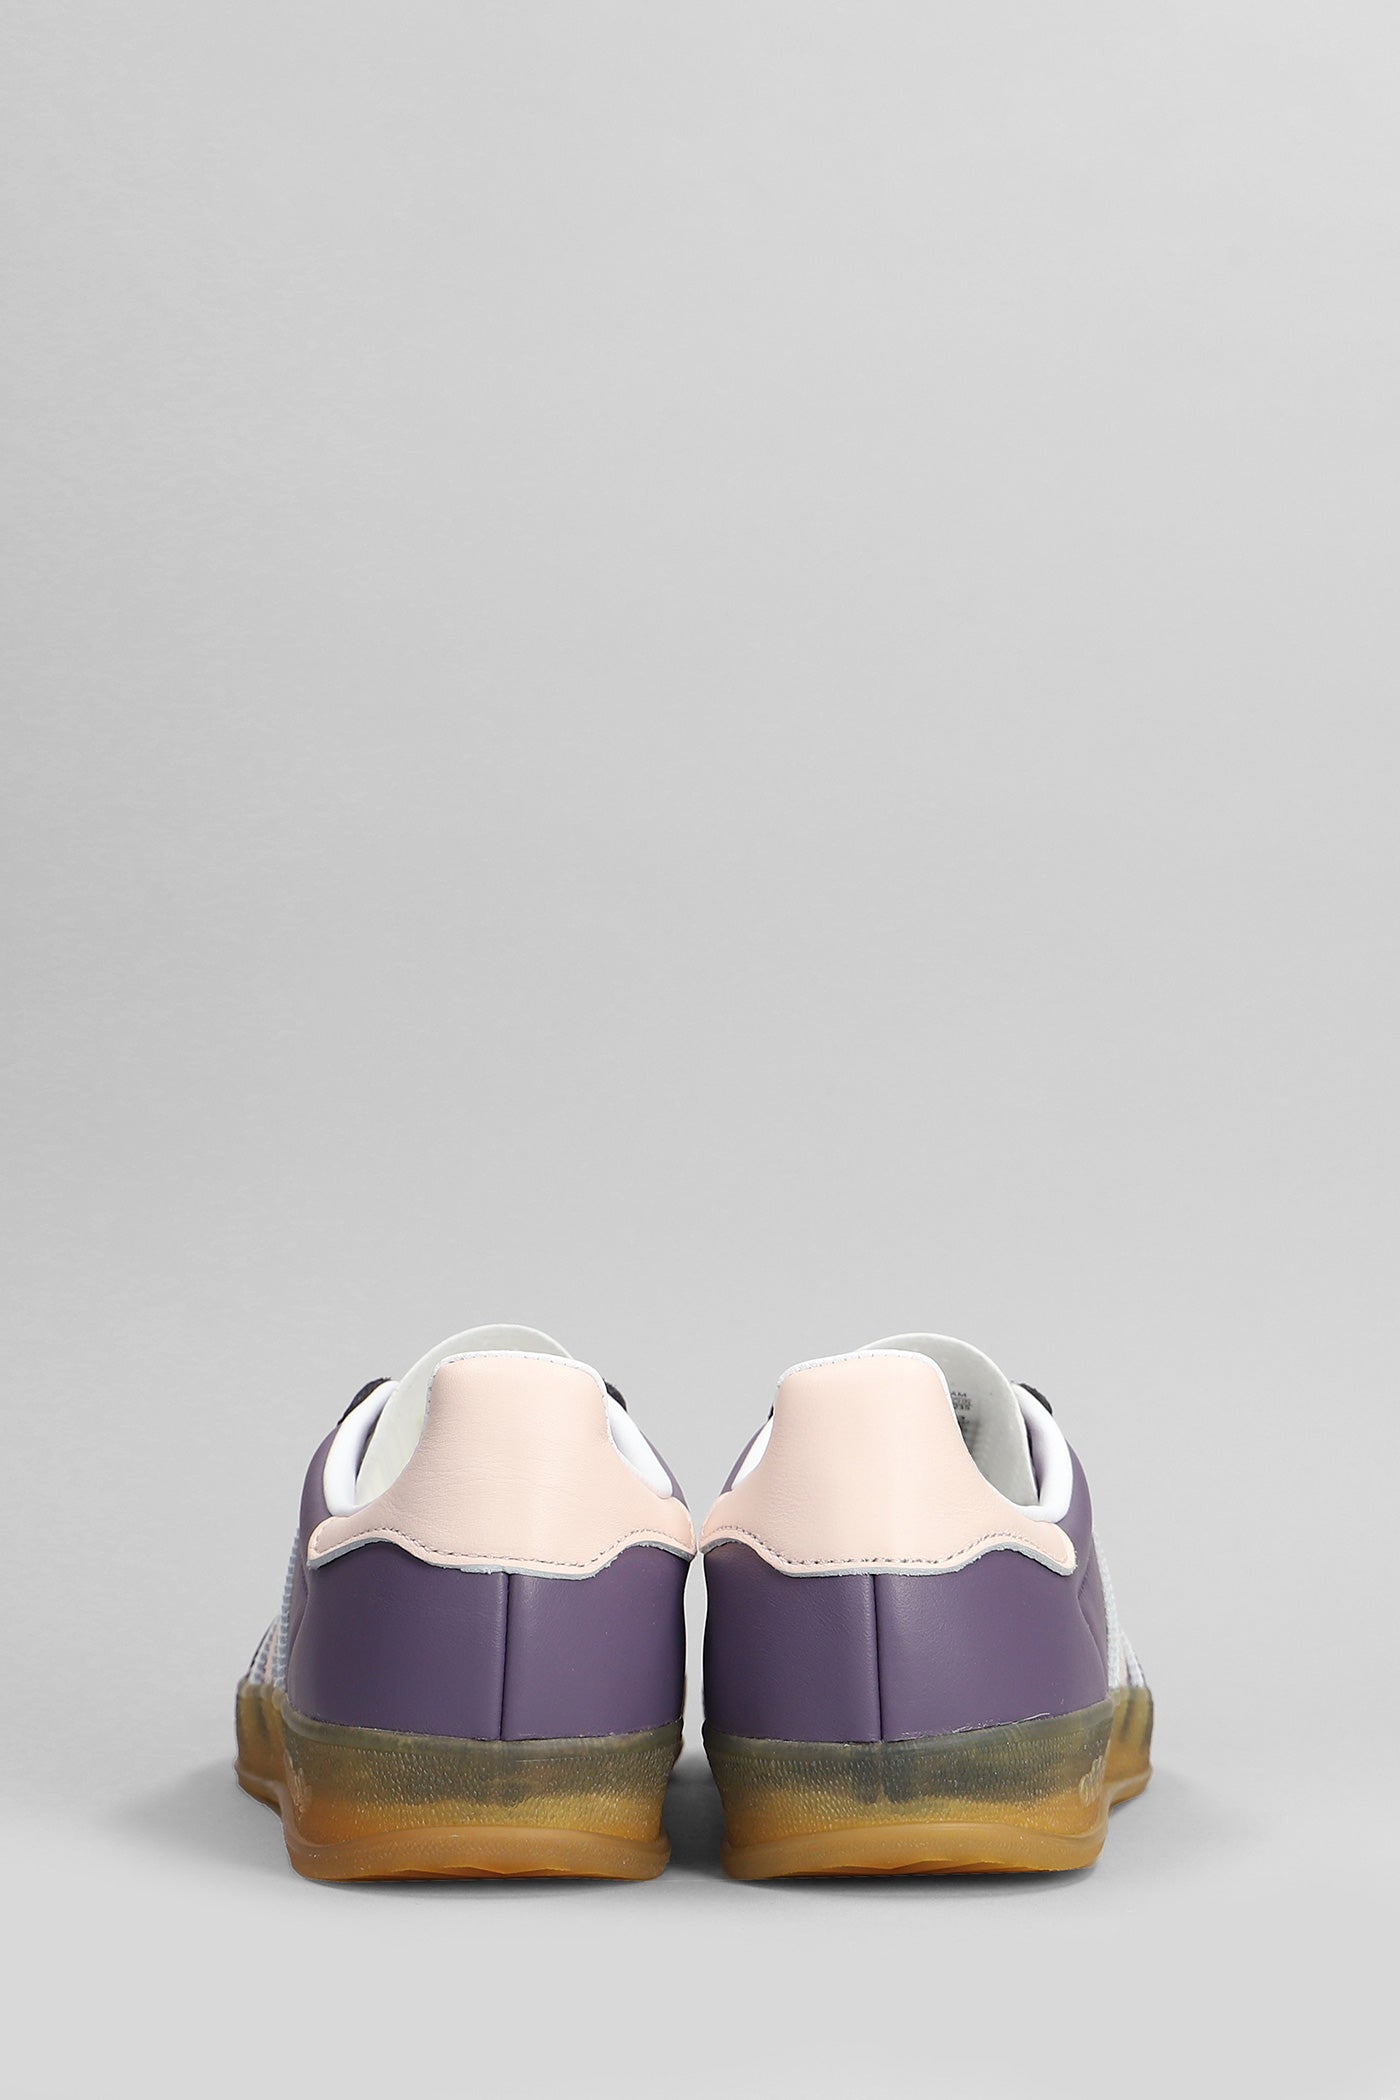 Gazelle Indor W Sneakers in Viola leather